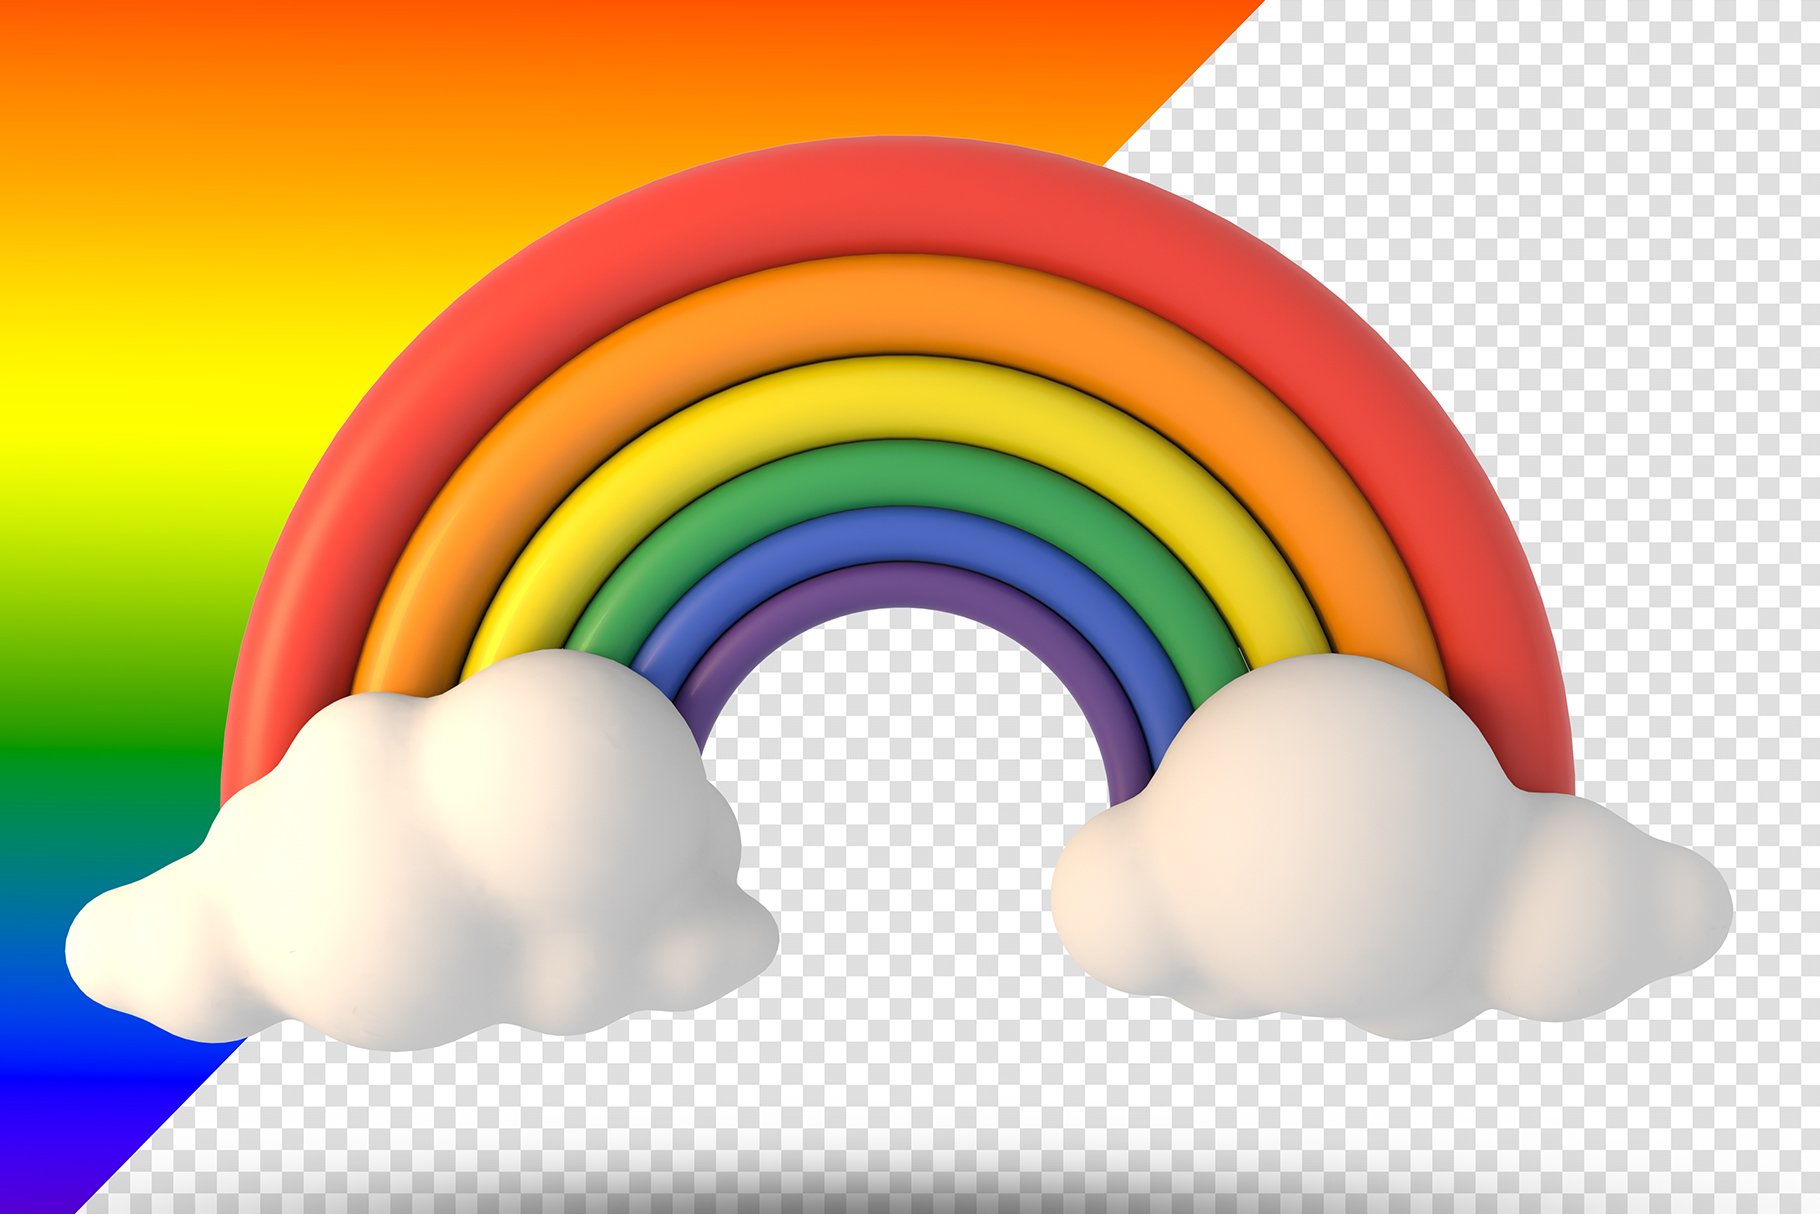 3D render Modeling clay rainbow cover image.